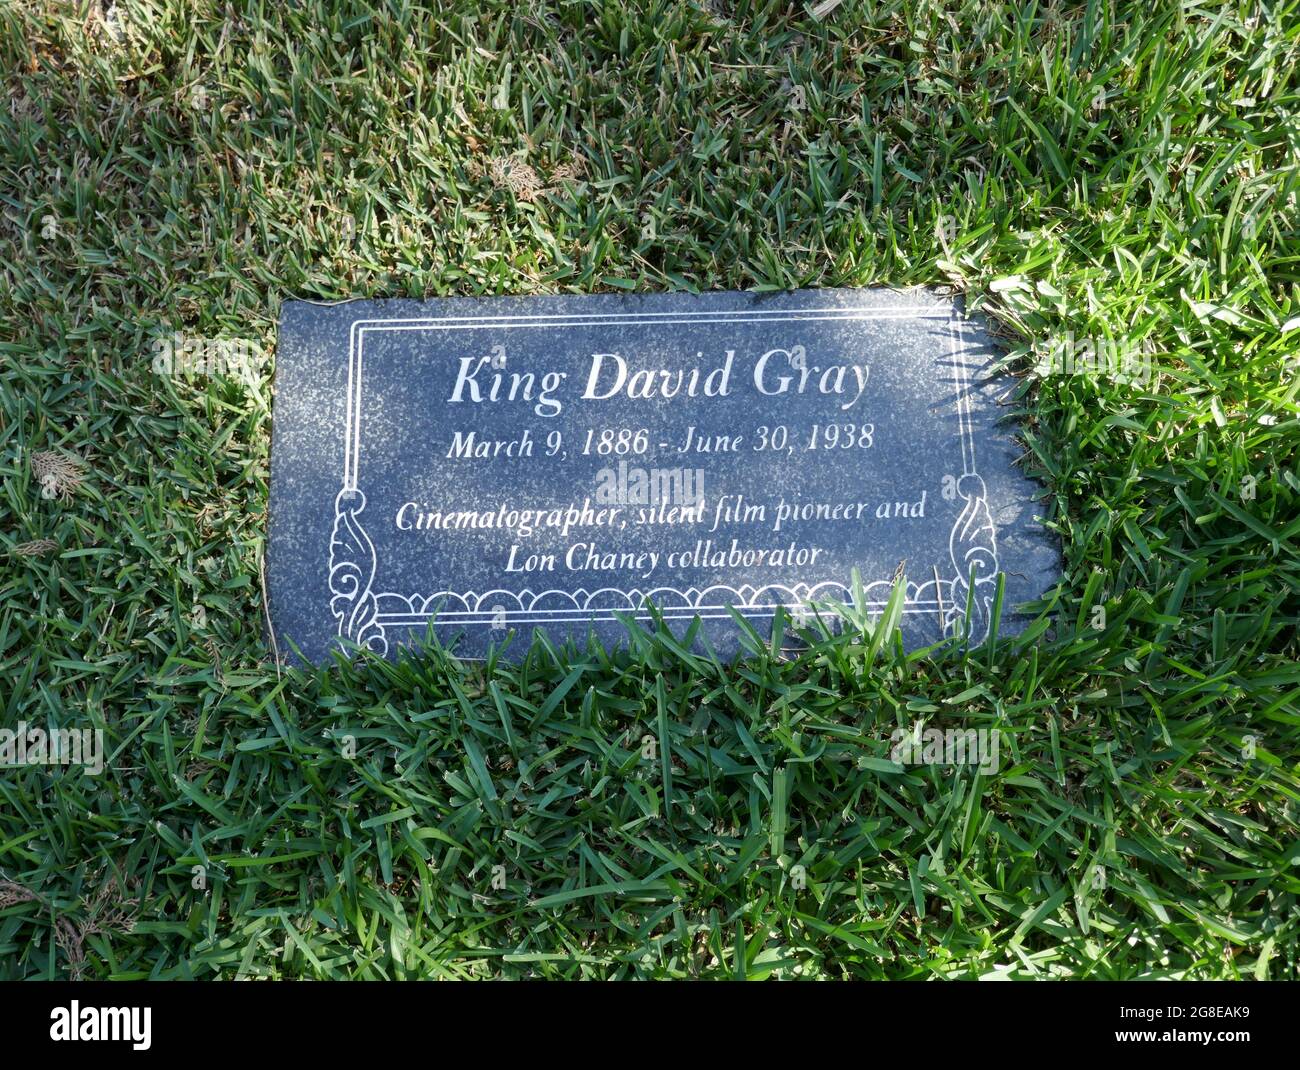 Los Angeles, California, USA 17th July 2021 A general view of atmosphere of Murder/victim/cinematographer King David Gray's Grave at Hollywood Forever Cemetery on July 17, 2021 in Los Angeles, California, USA. Photo by Barry King/Alamy Stock Photo Stock Photo